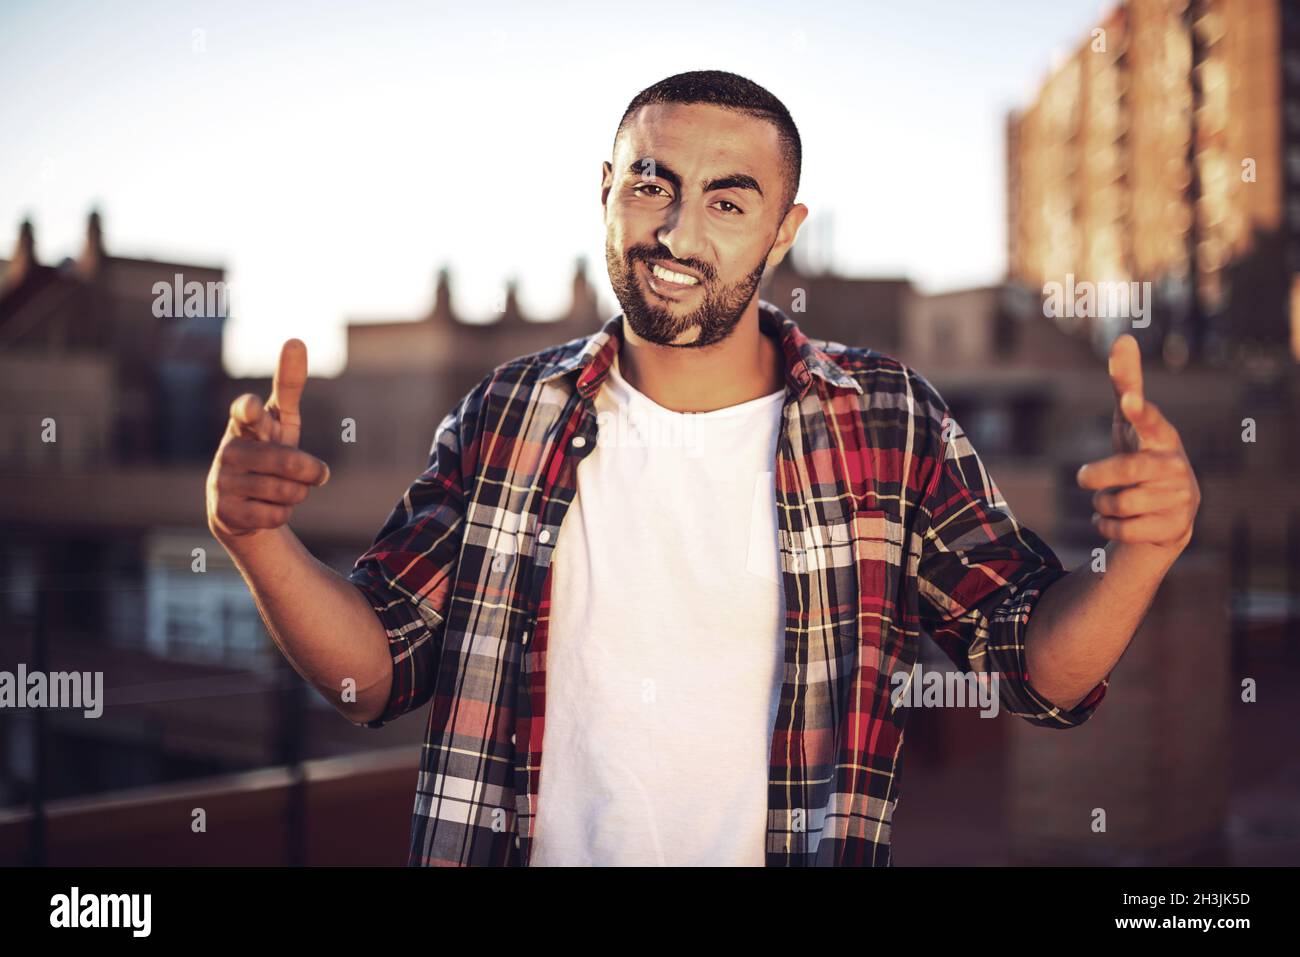 Good looking young arab man in casual clothes in urban environment Stock Photo